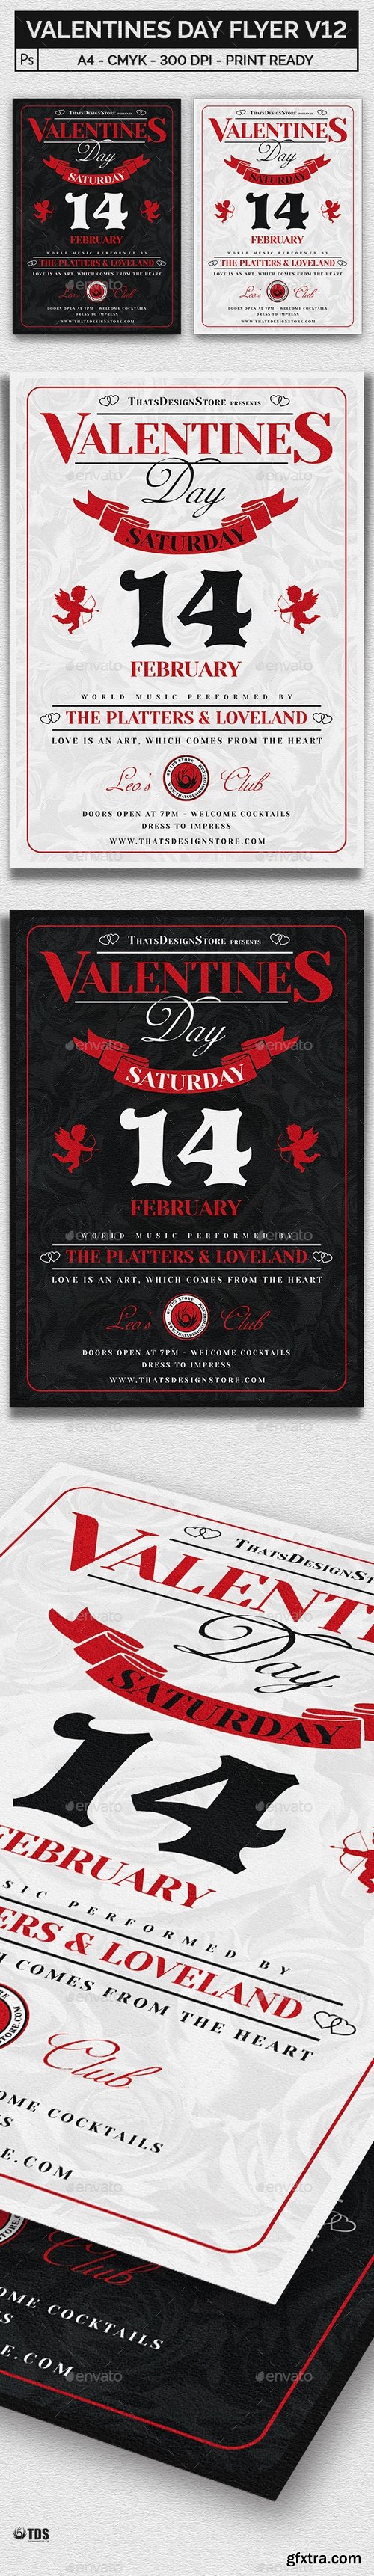 Graphicriver - Valentines Day Flyer Template V12 21115097